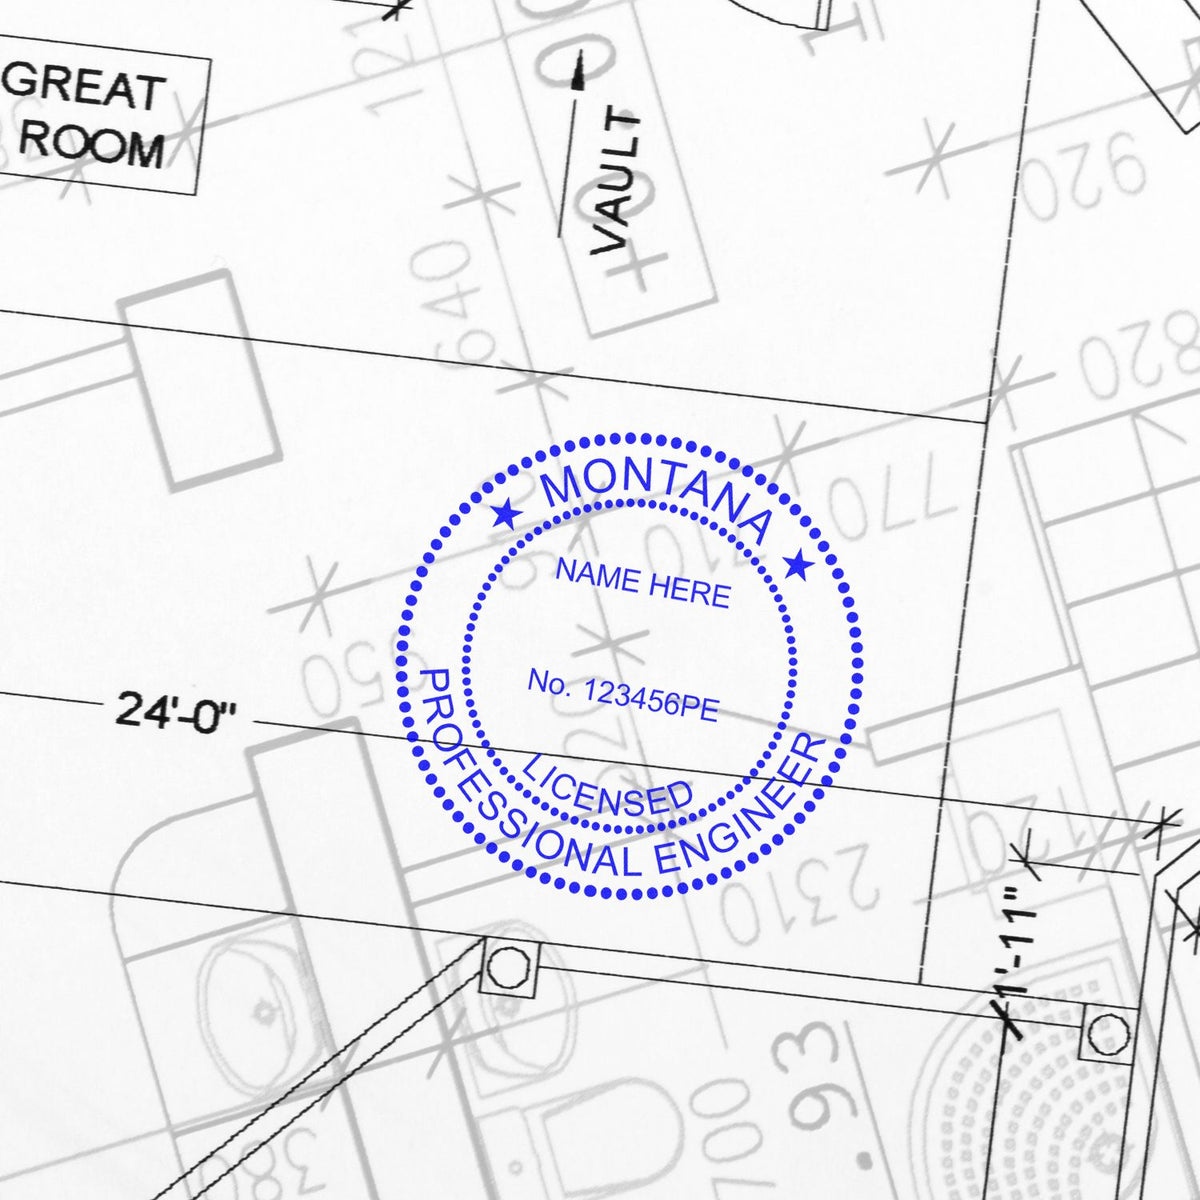 An alternative view of the Premium MaxLight Pre-Inked Montana Engineering Stamp stamped on a sheet of paper showing the image in use